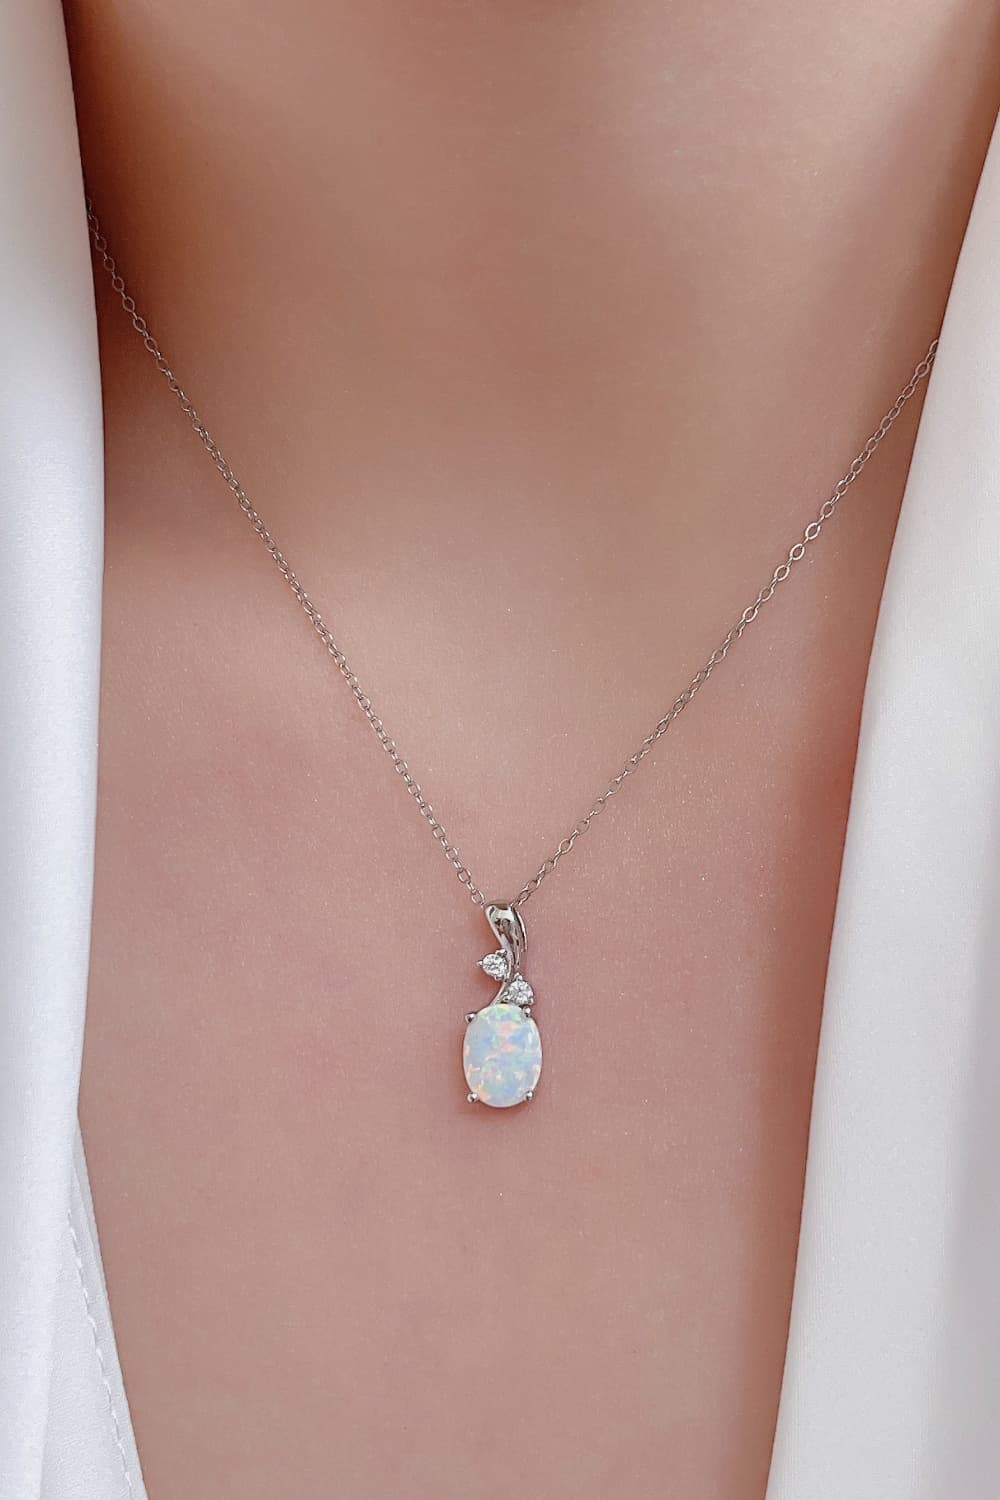 Opal Oval Pendant Chain Necklace - Tophatter Deals